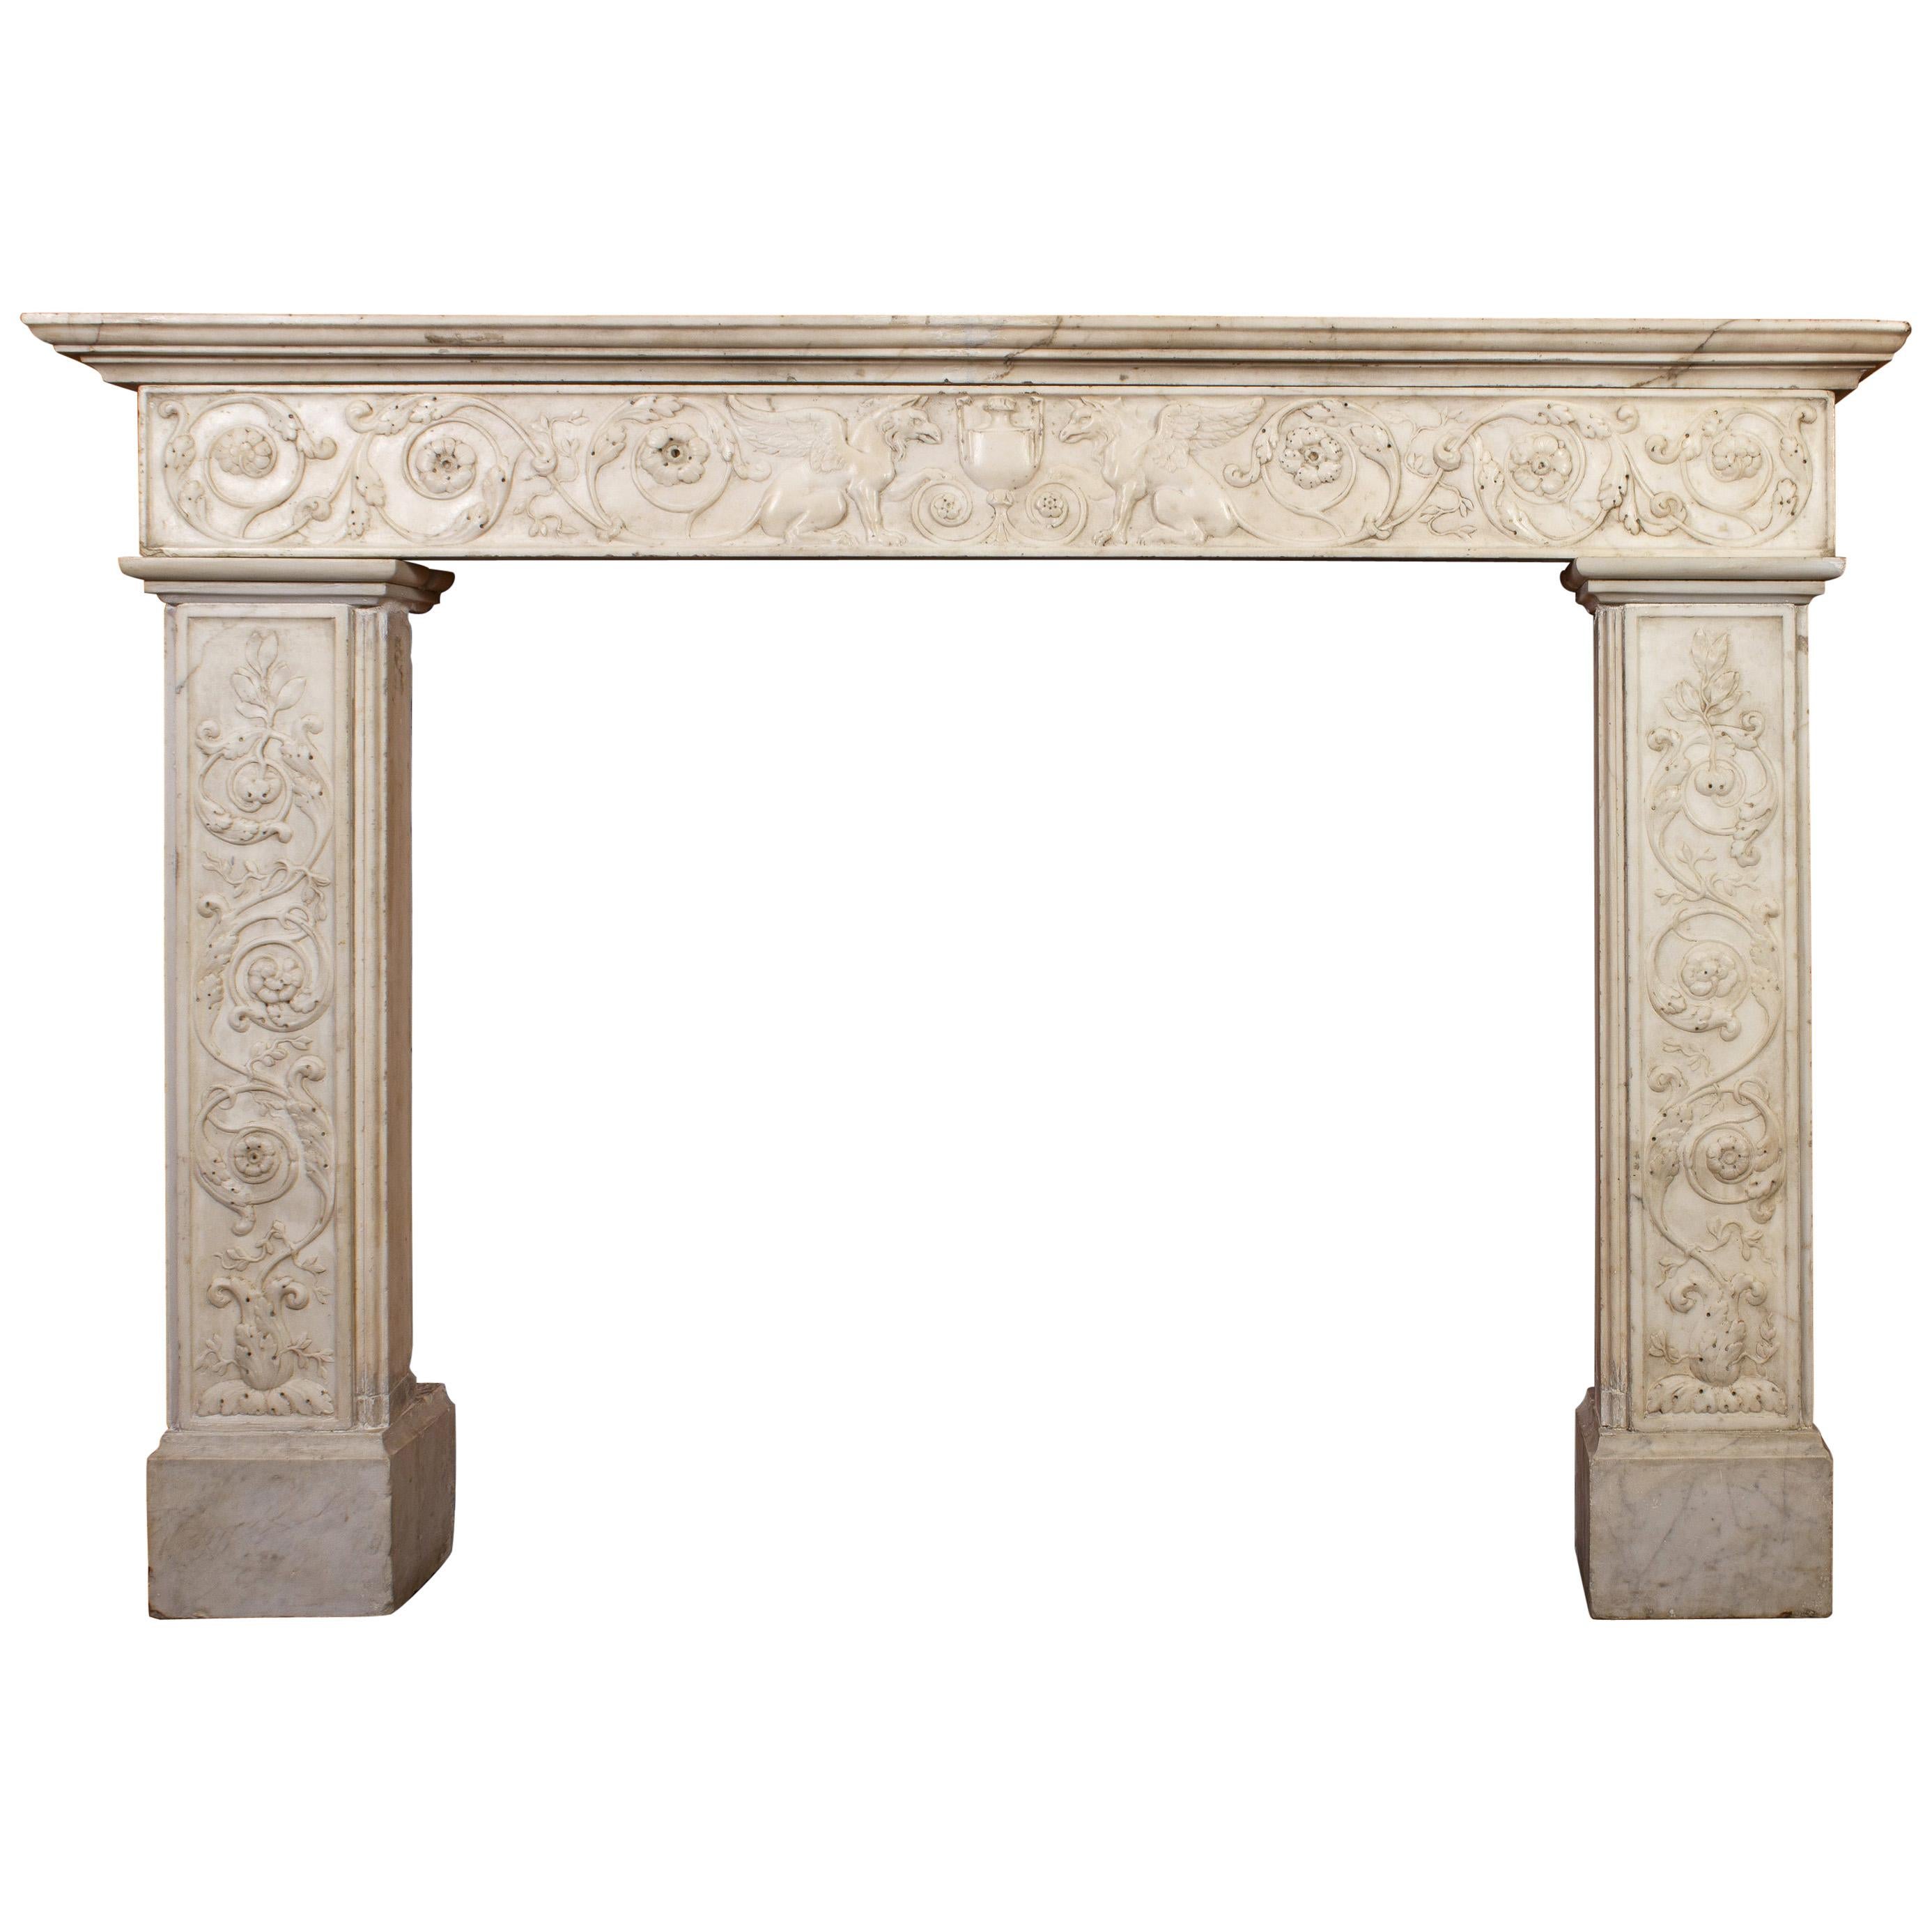 Superb Neoclassical White Marble Fireplace, Italy, 1790